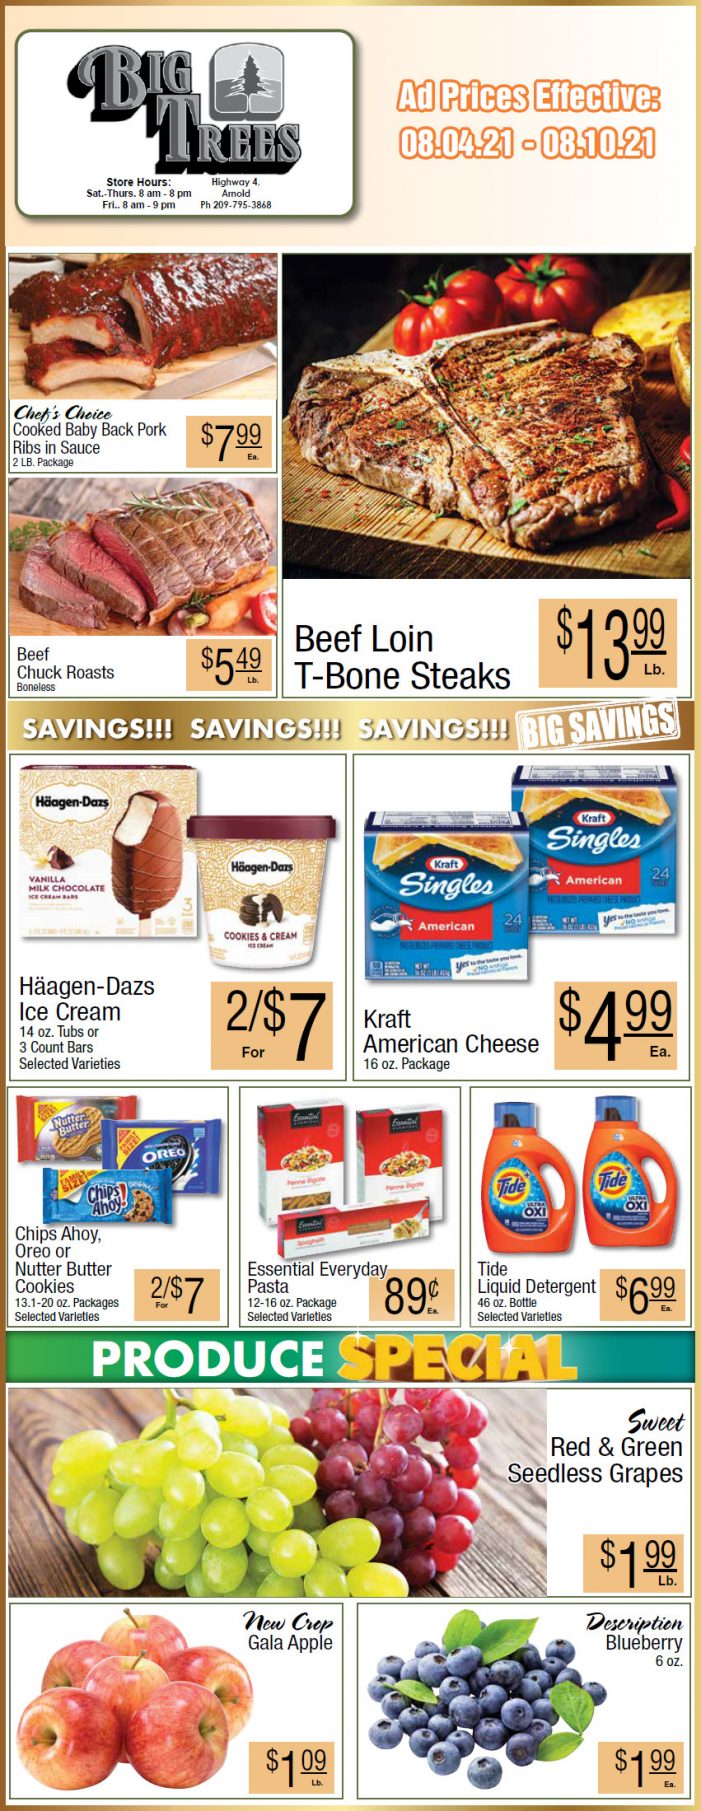 Big Trees Market Weekly Ad & Grocery Specials Through August 10th! Shop Local & Save!!